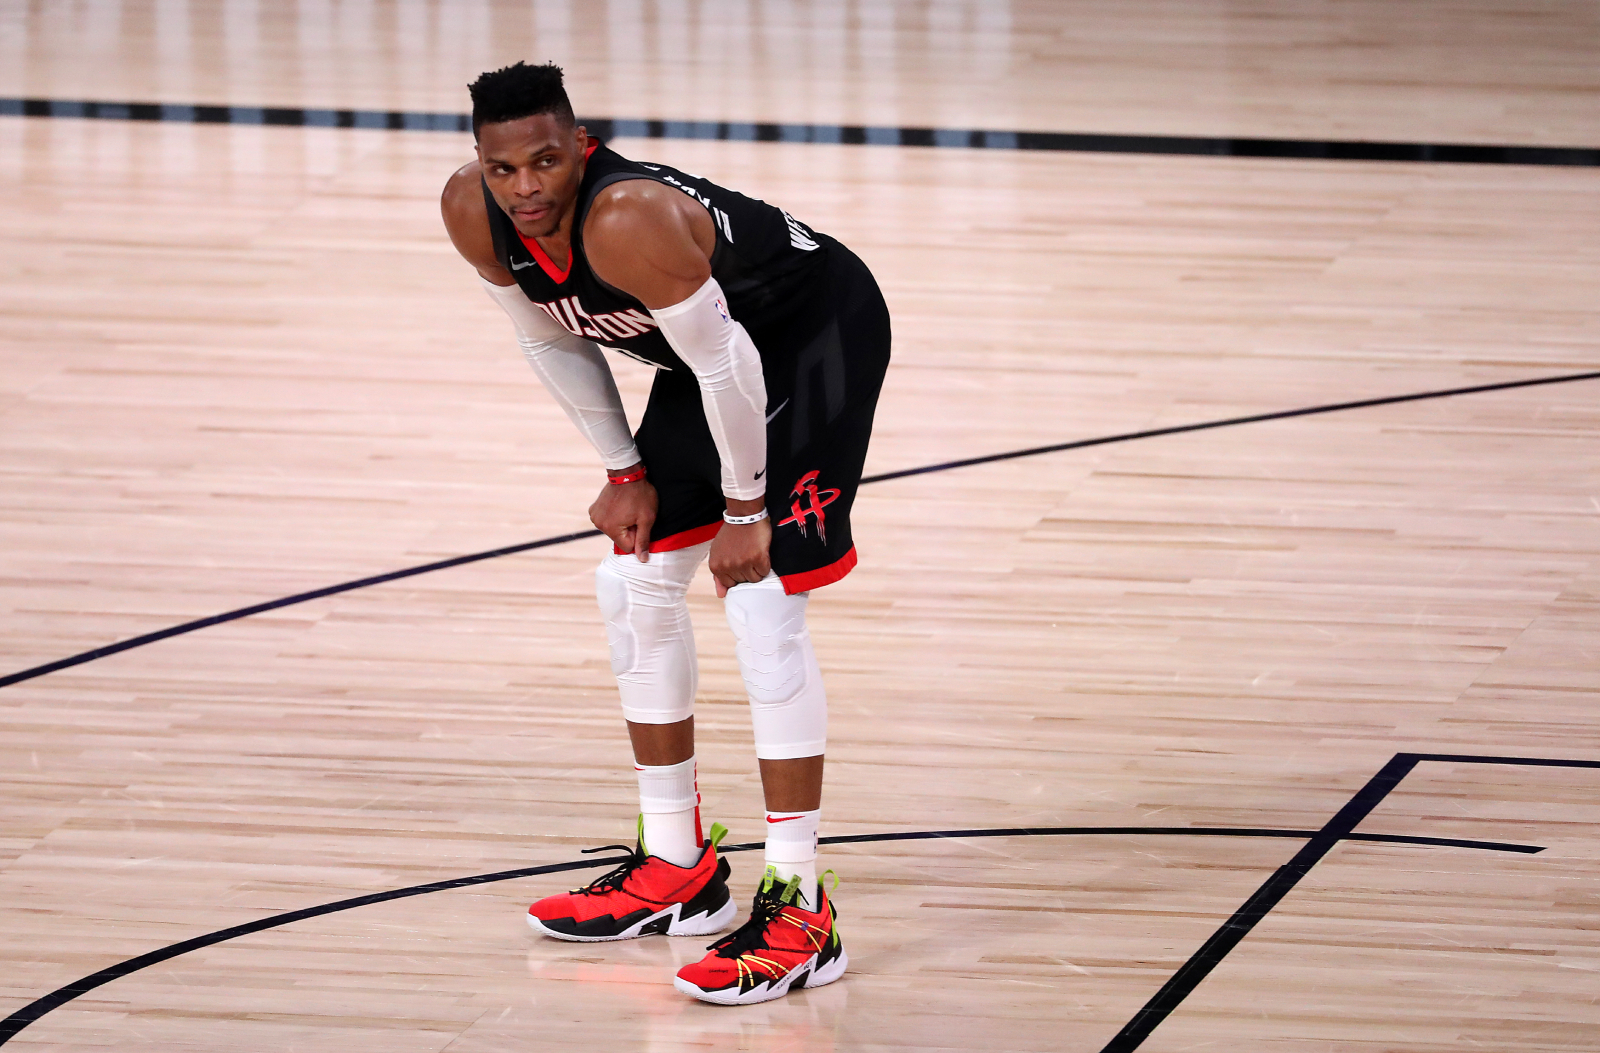 Russell Westbrook exchanged words with Rajon Rondo's brother during a recent playoff game. The Rockets' star was not happy after the game.